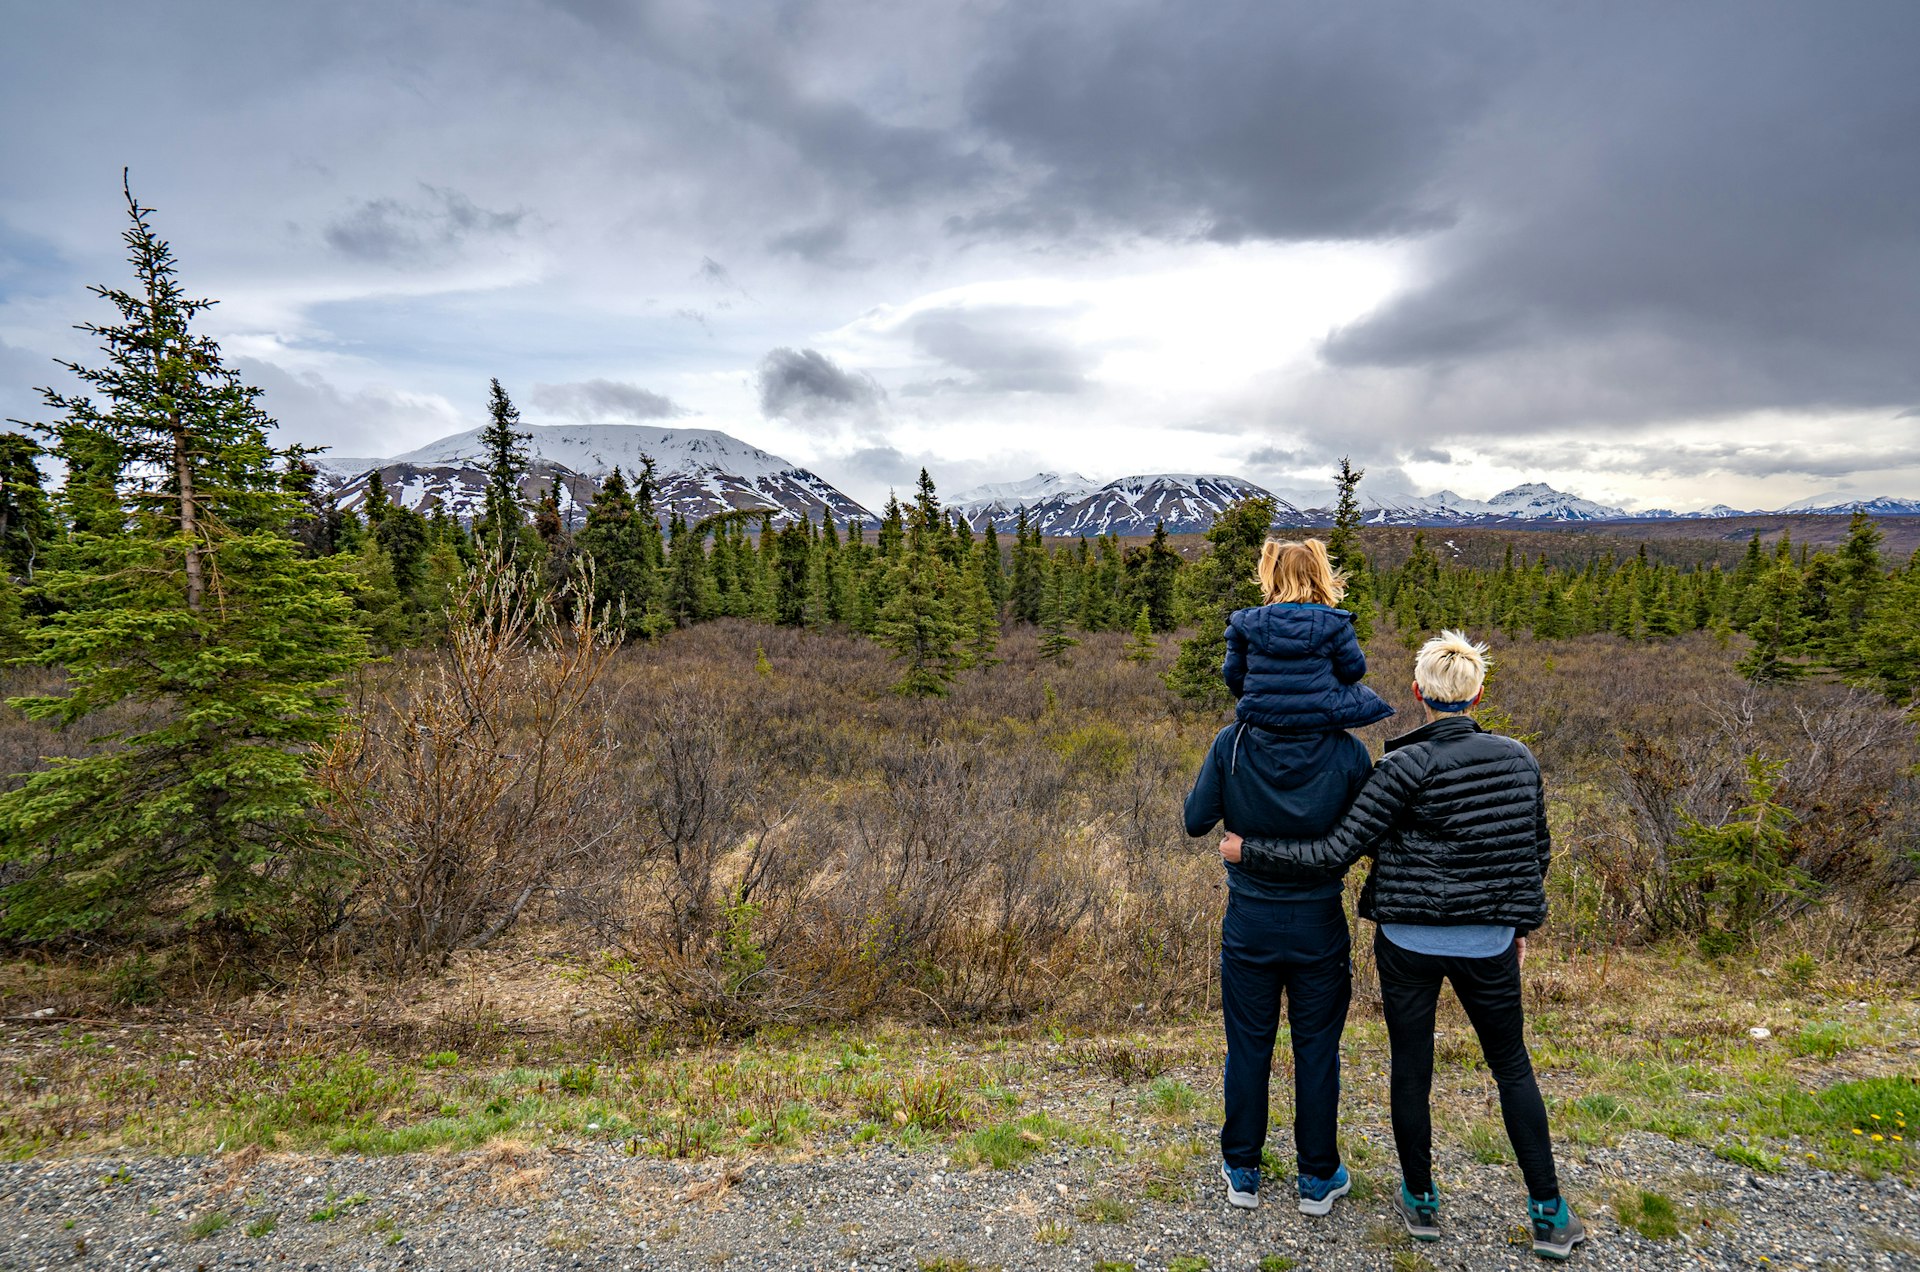 Two parents and a child enjoying the scenery at Denali National Park, Alaska